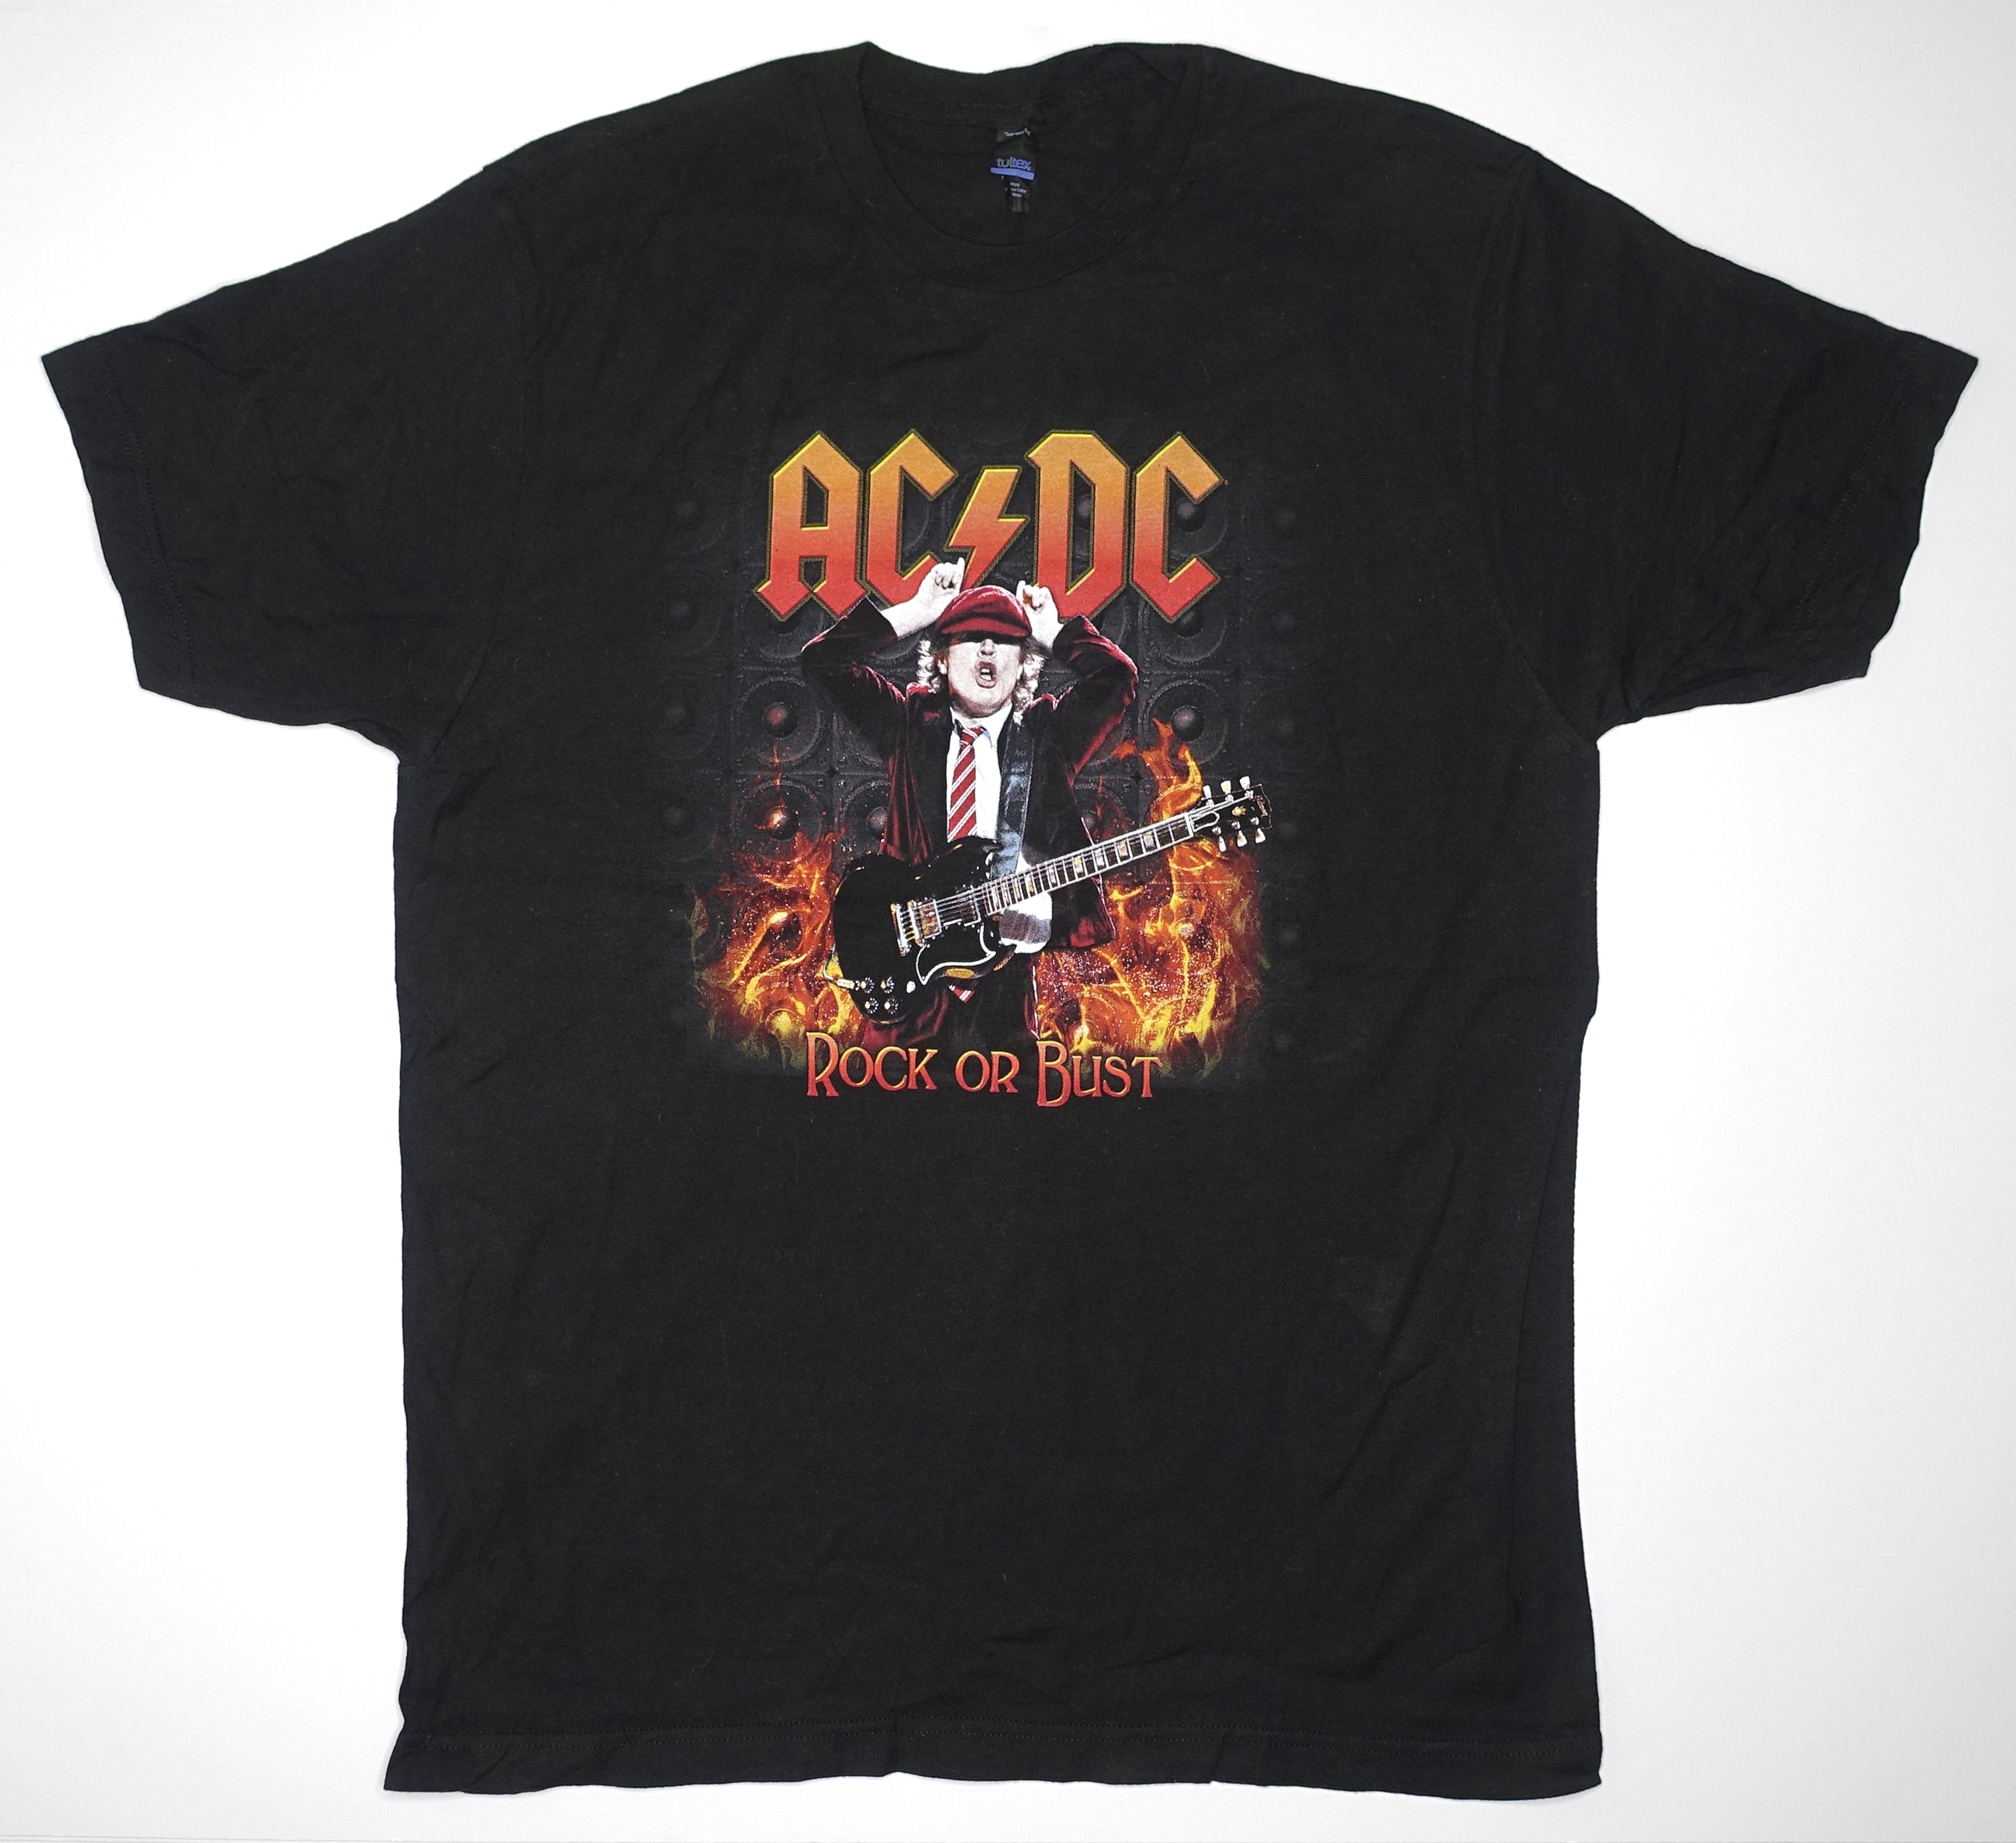 AC/DC – Highway To North America 2015 Tour Shirt Size Large